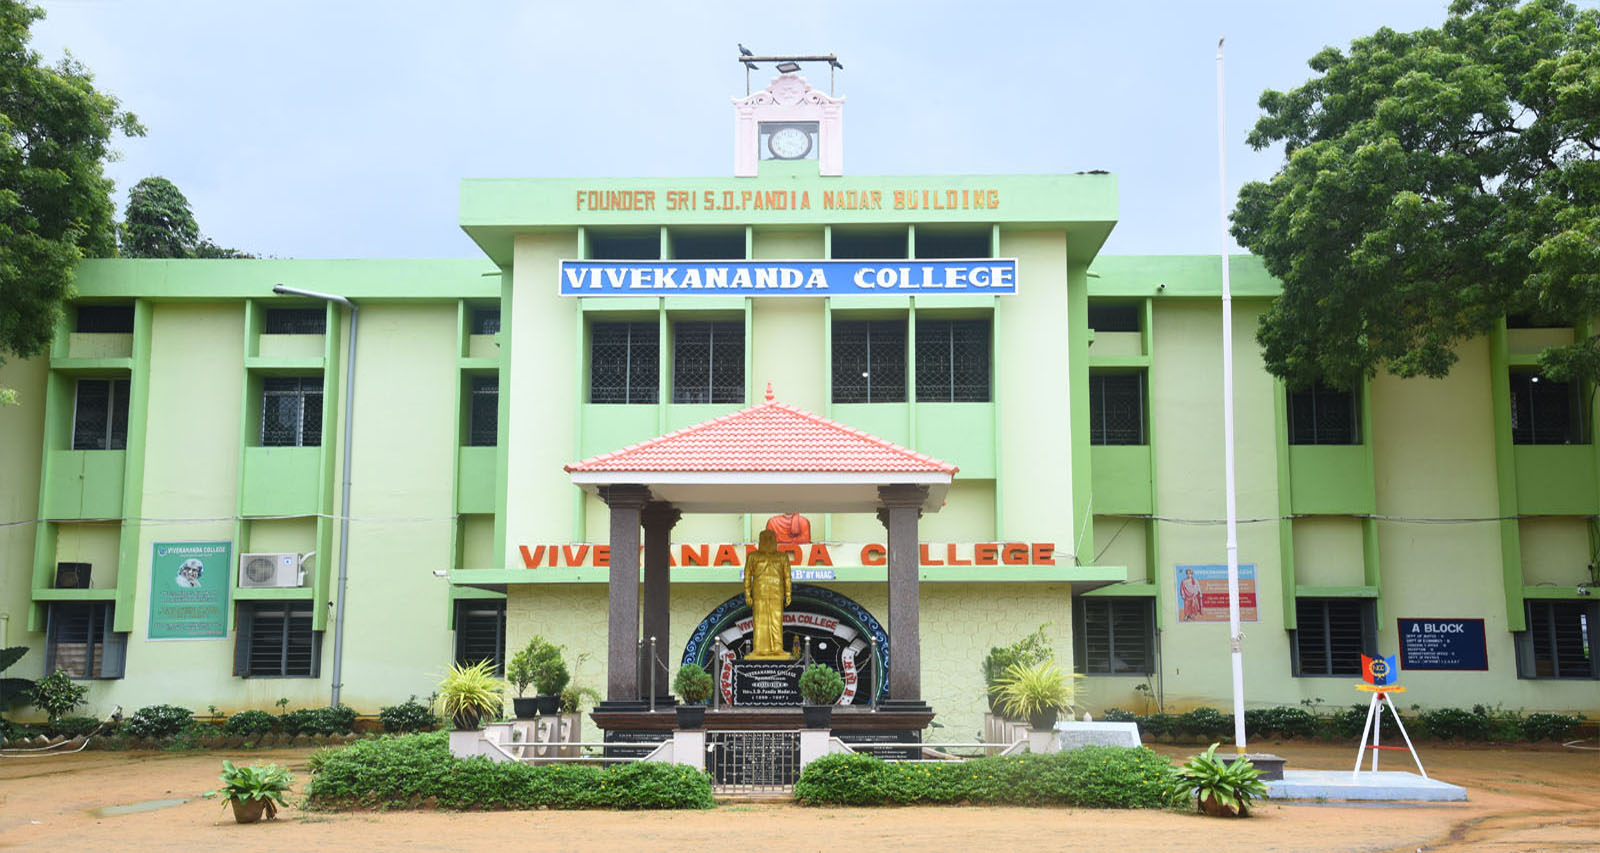 Vivekananda College of Arts and Science